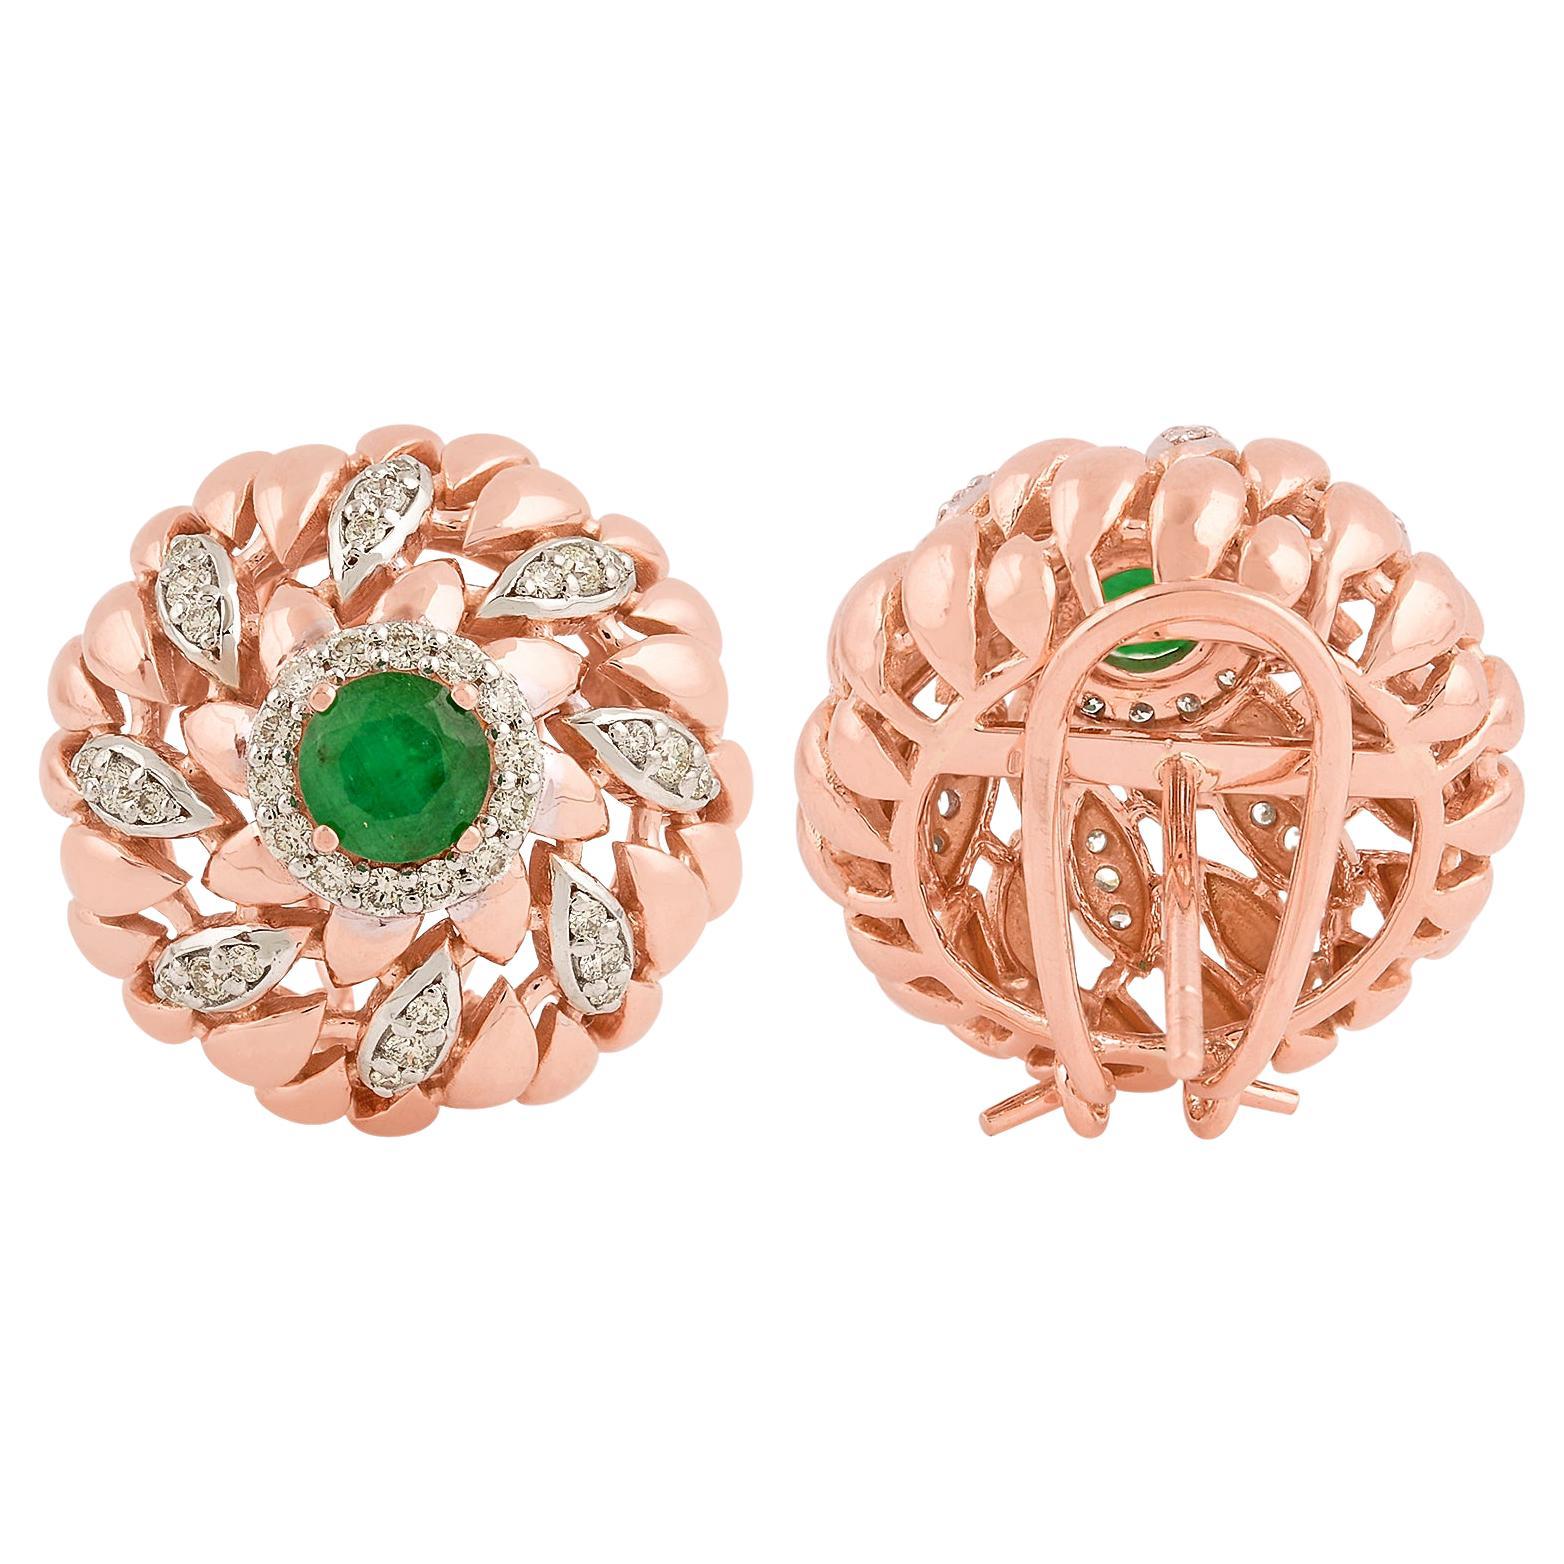 Natural Emerald Gemstone Stud Earrings Diamond Pave Solid 14k Rose Gold Jewelry